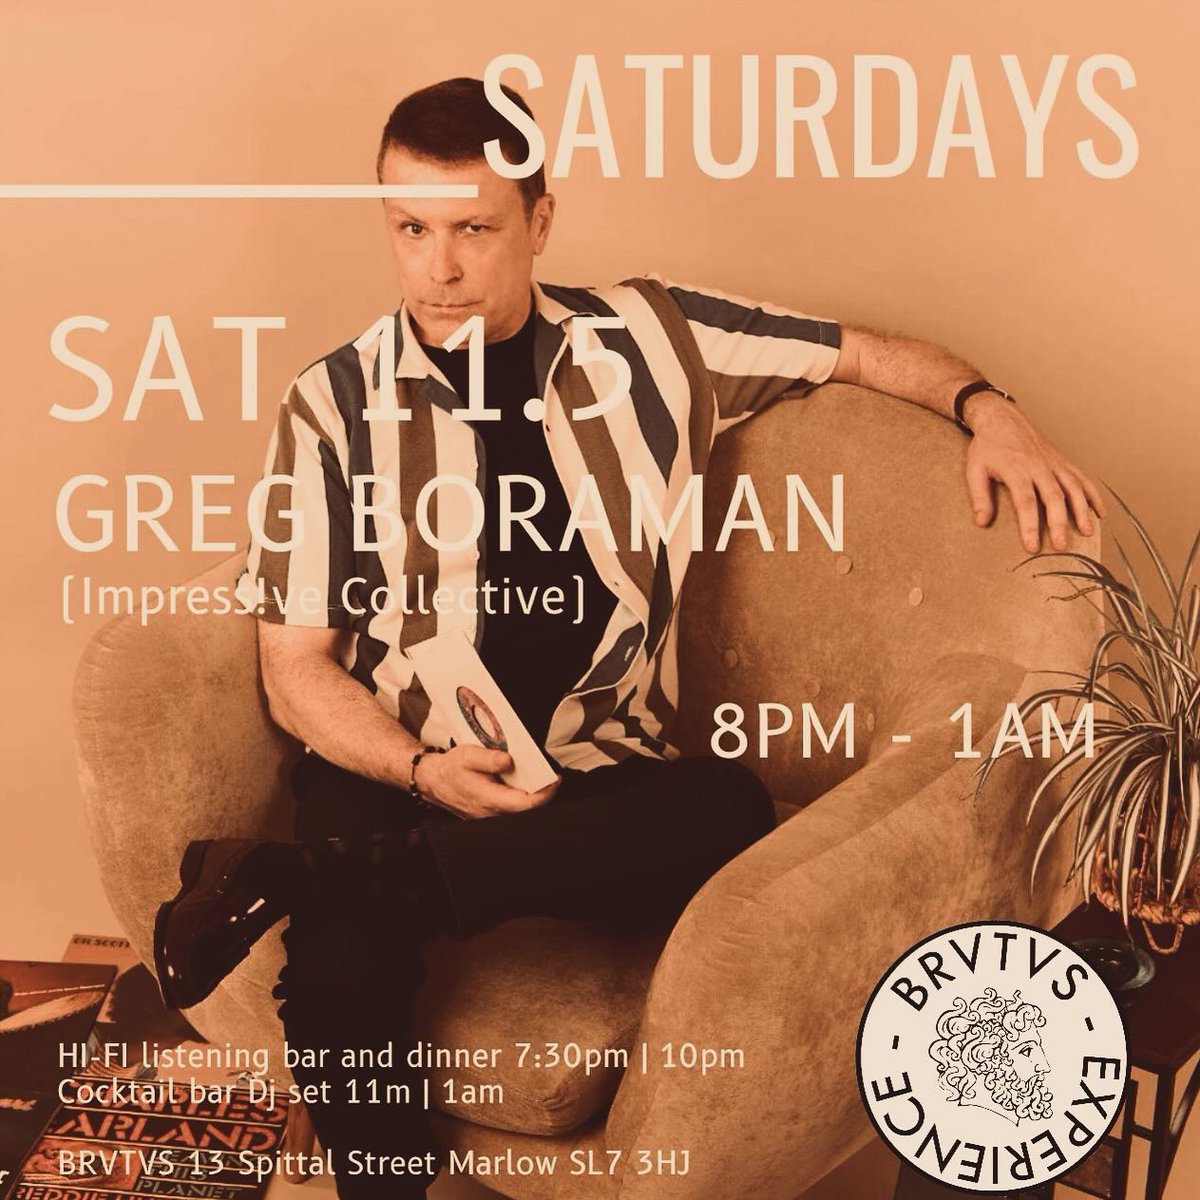 Saturday at BRVTVS, Marlow, Bucks Sat 11th May - Hi-Fi listening bar 7:30pm | 1am I'll be spinning many types of sounds including some exclusive, including a few as yet unreleased tracks from freshly minted 'IMPRESS!VE Collective' test pressings @imprssvcllctve @bbemusic